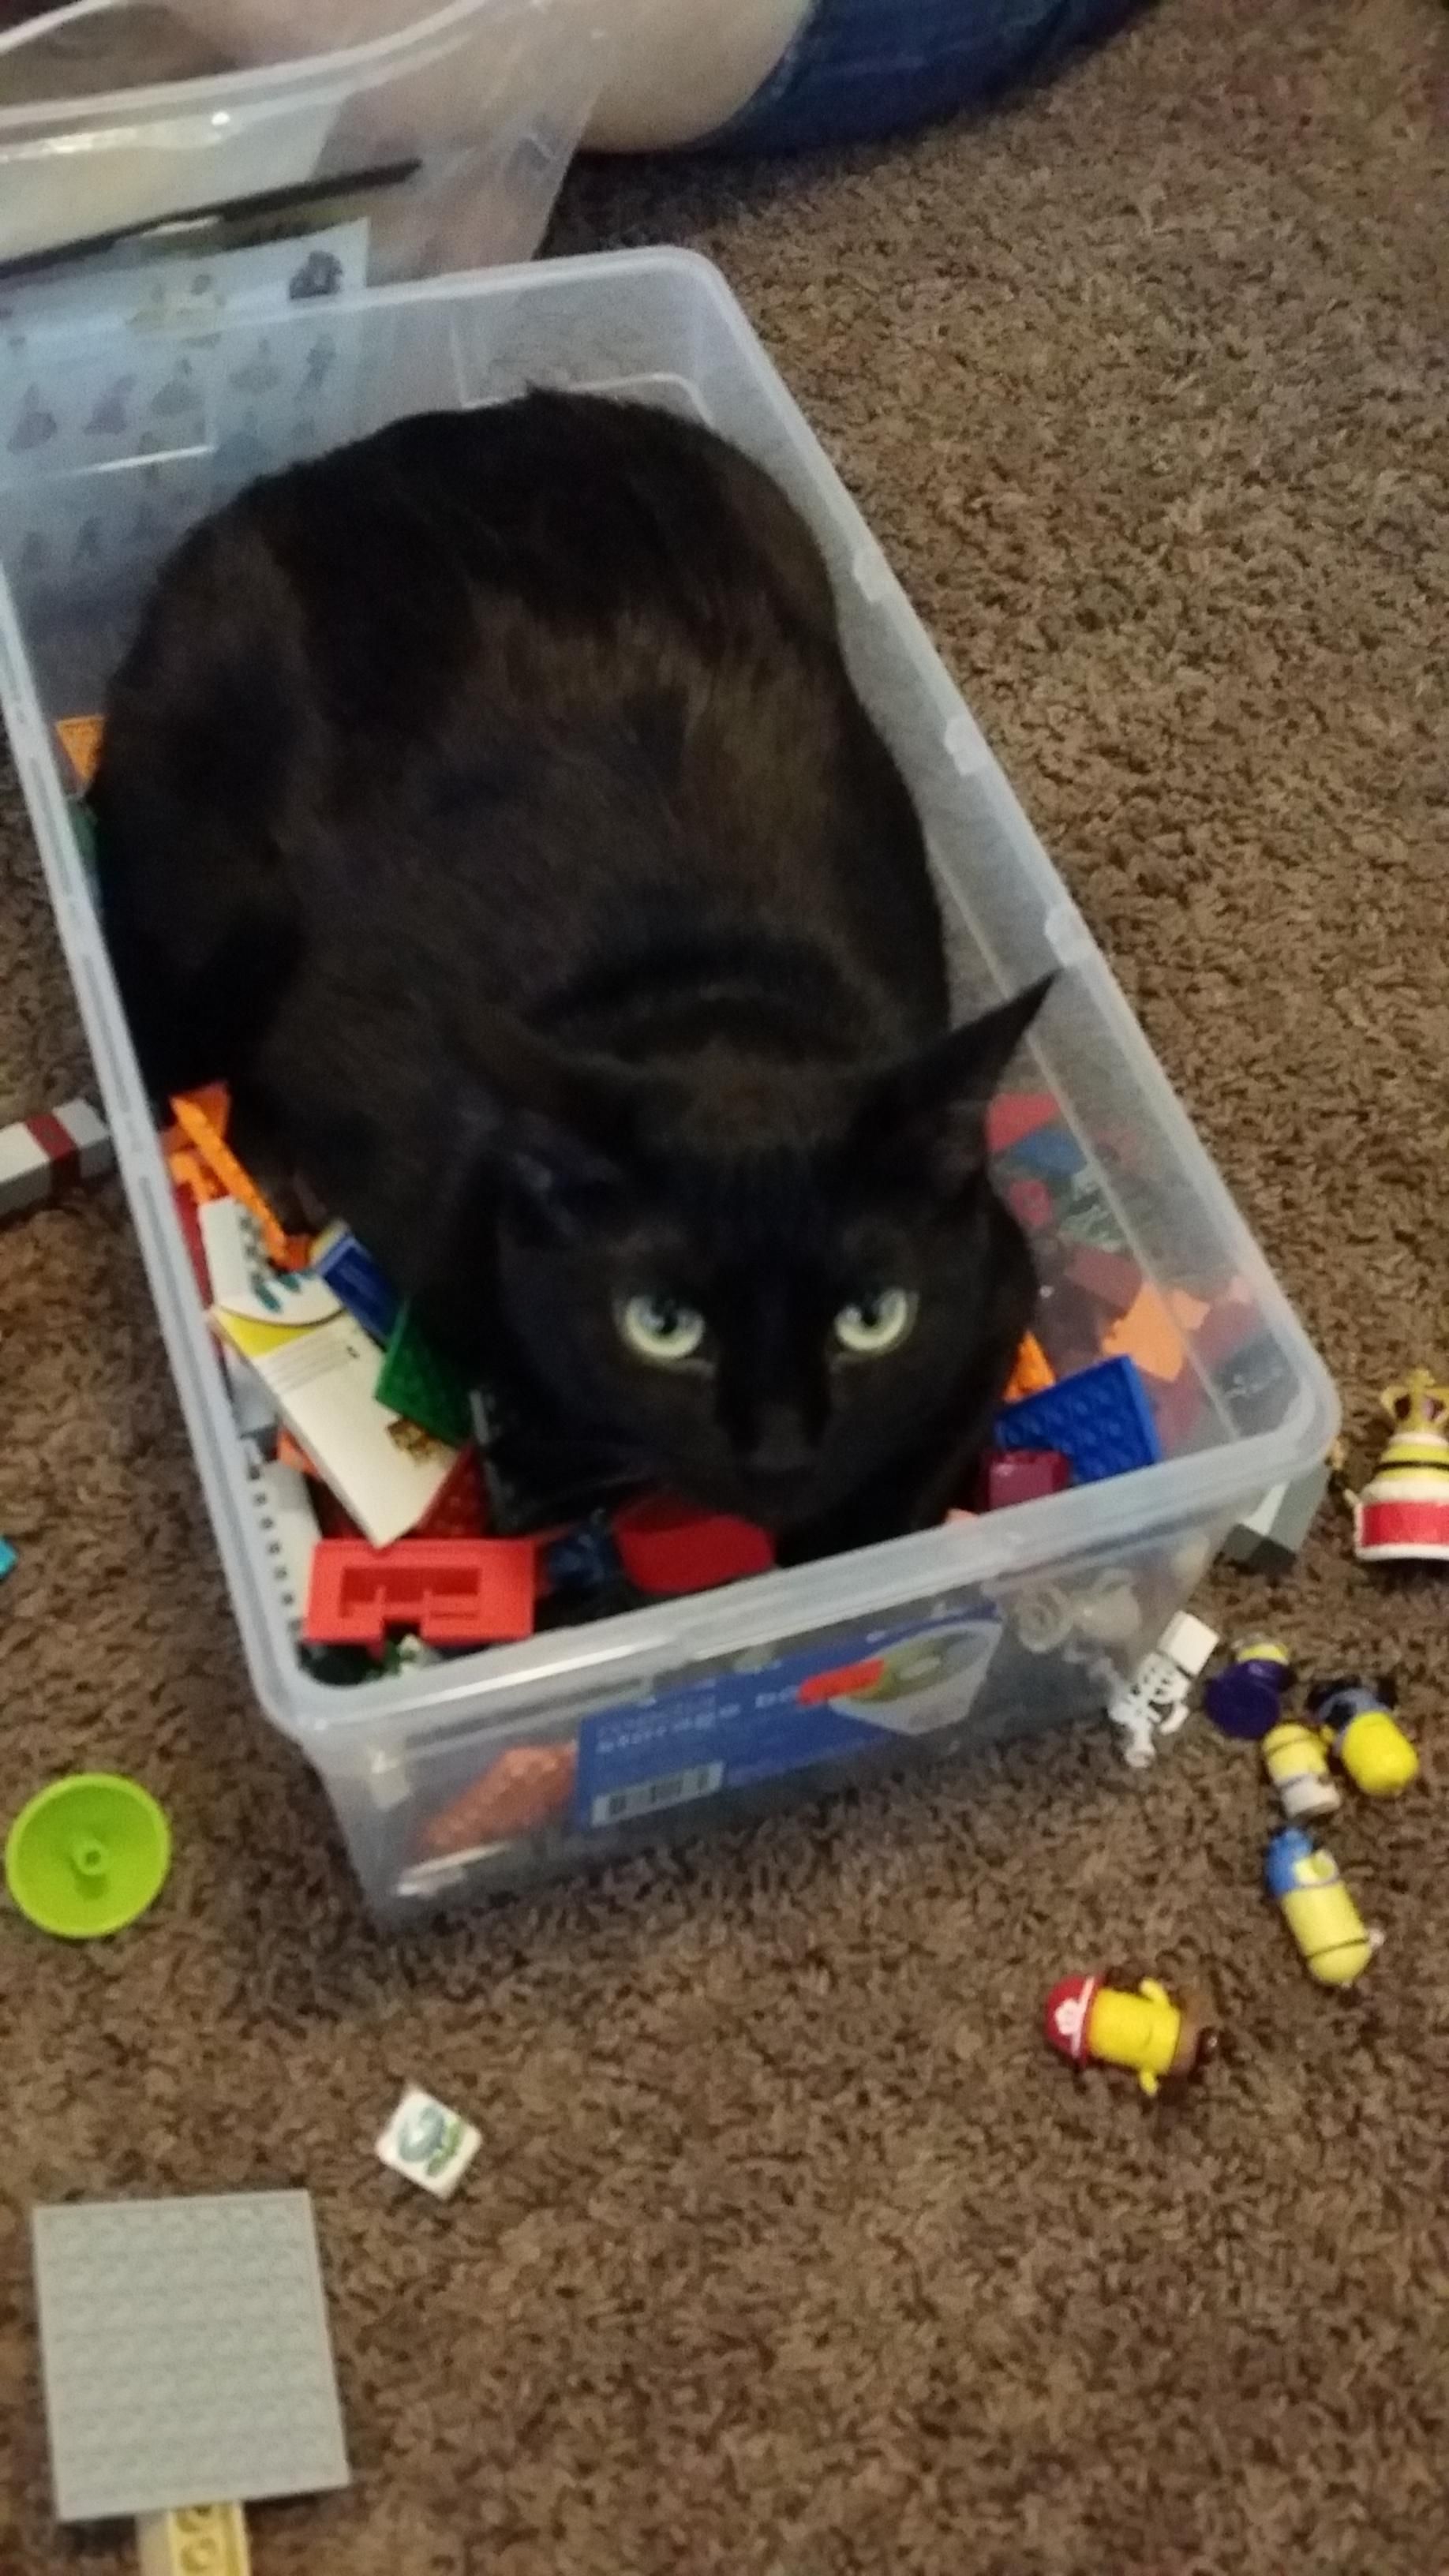 Either my Legos are defective or my cat inpervious to pain.